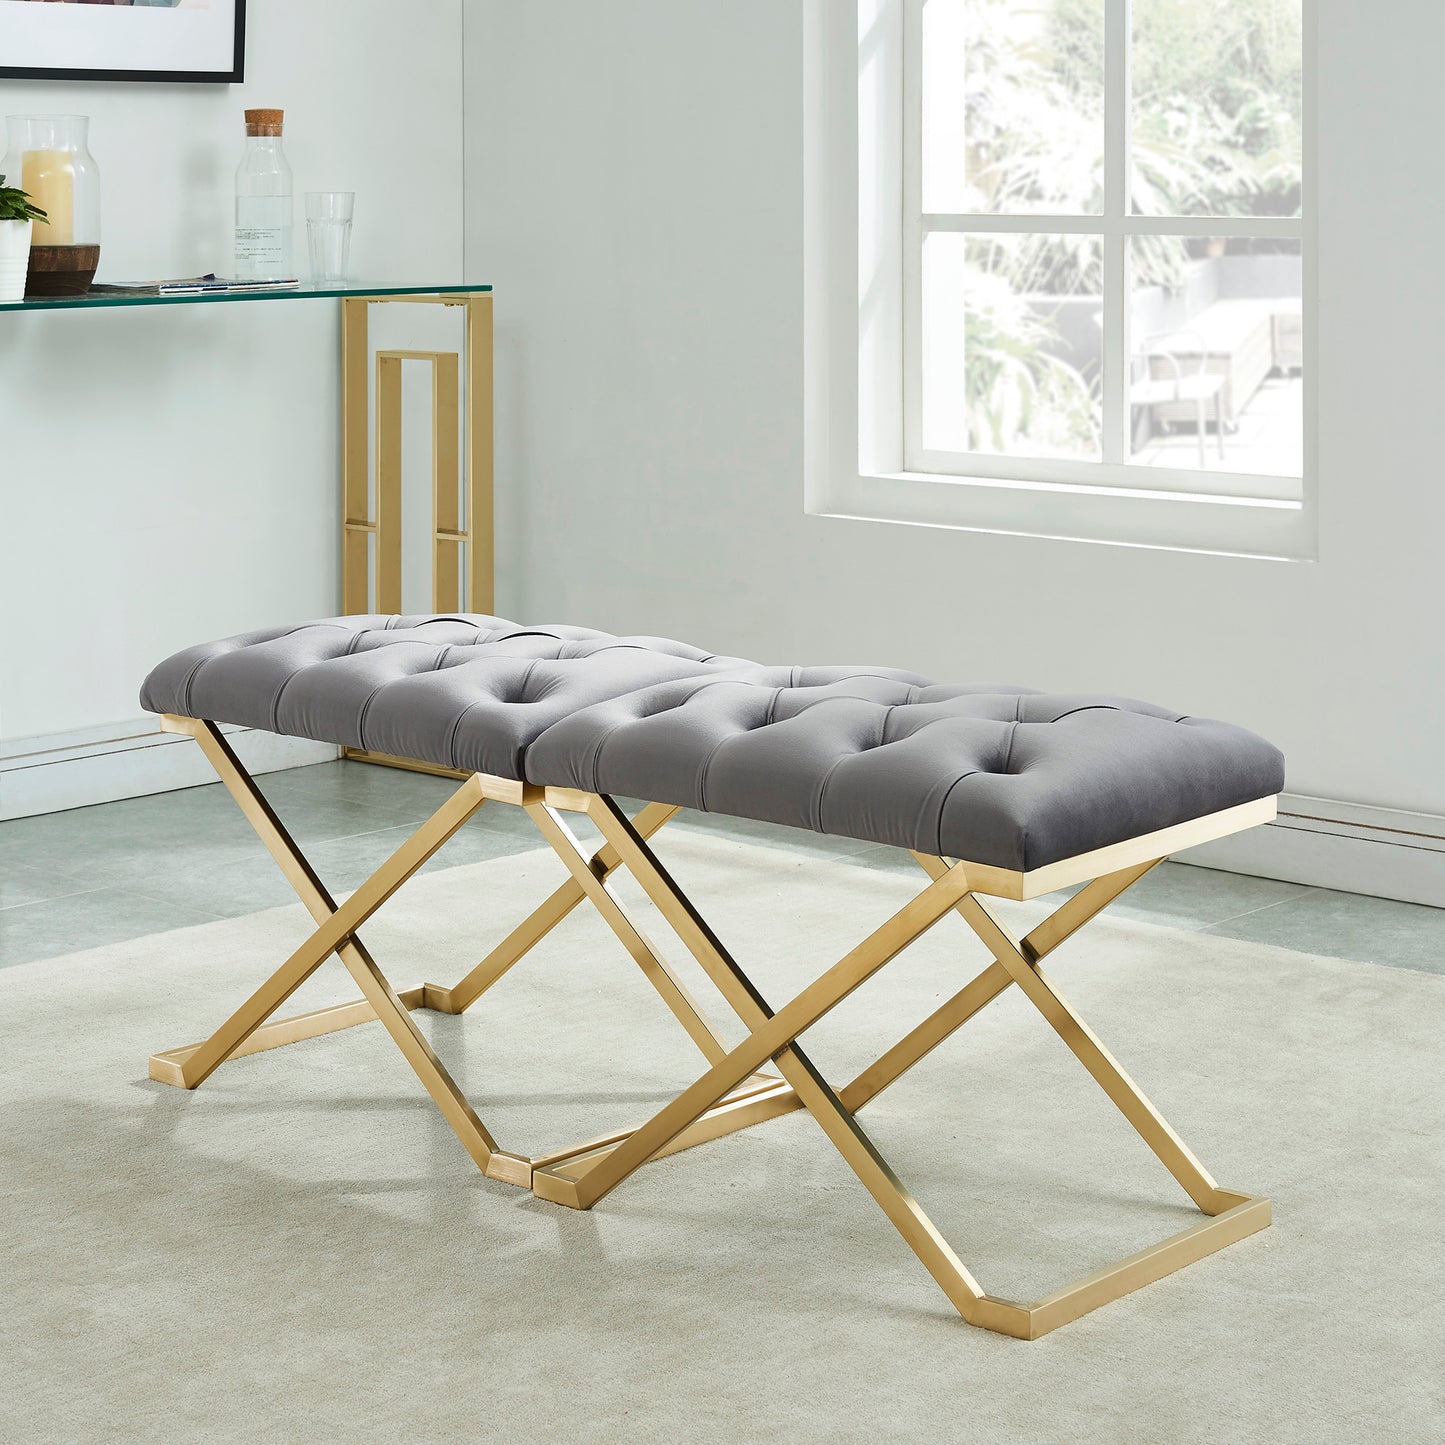 Rada Bench in Grey and Gold